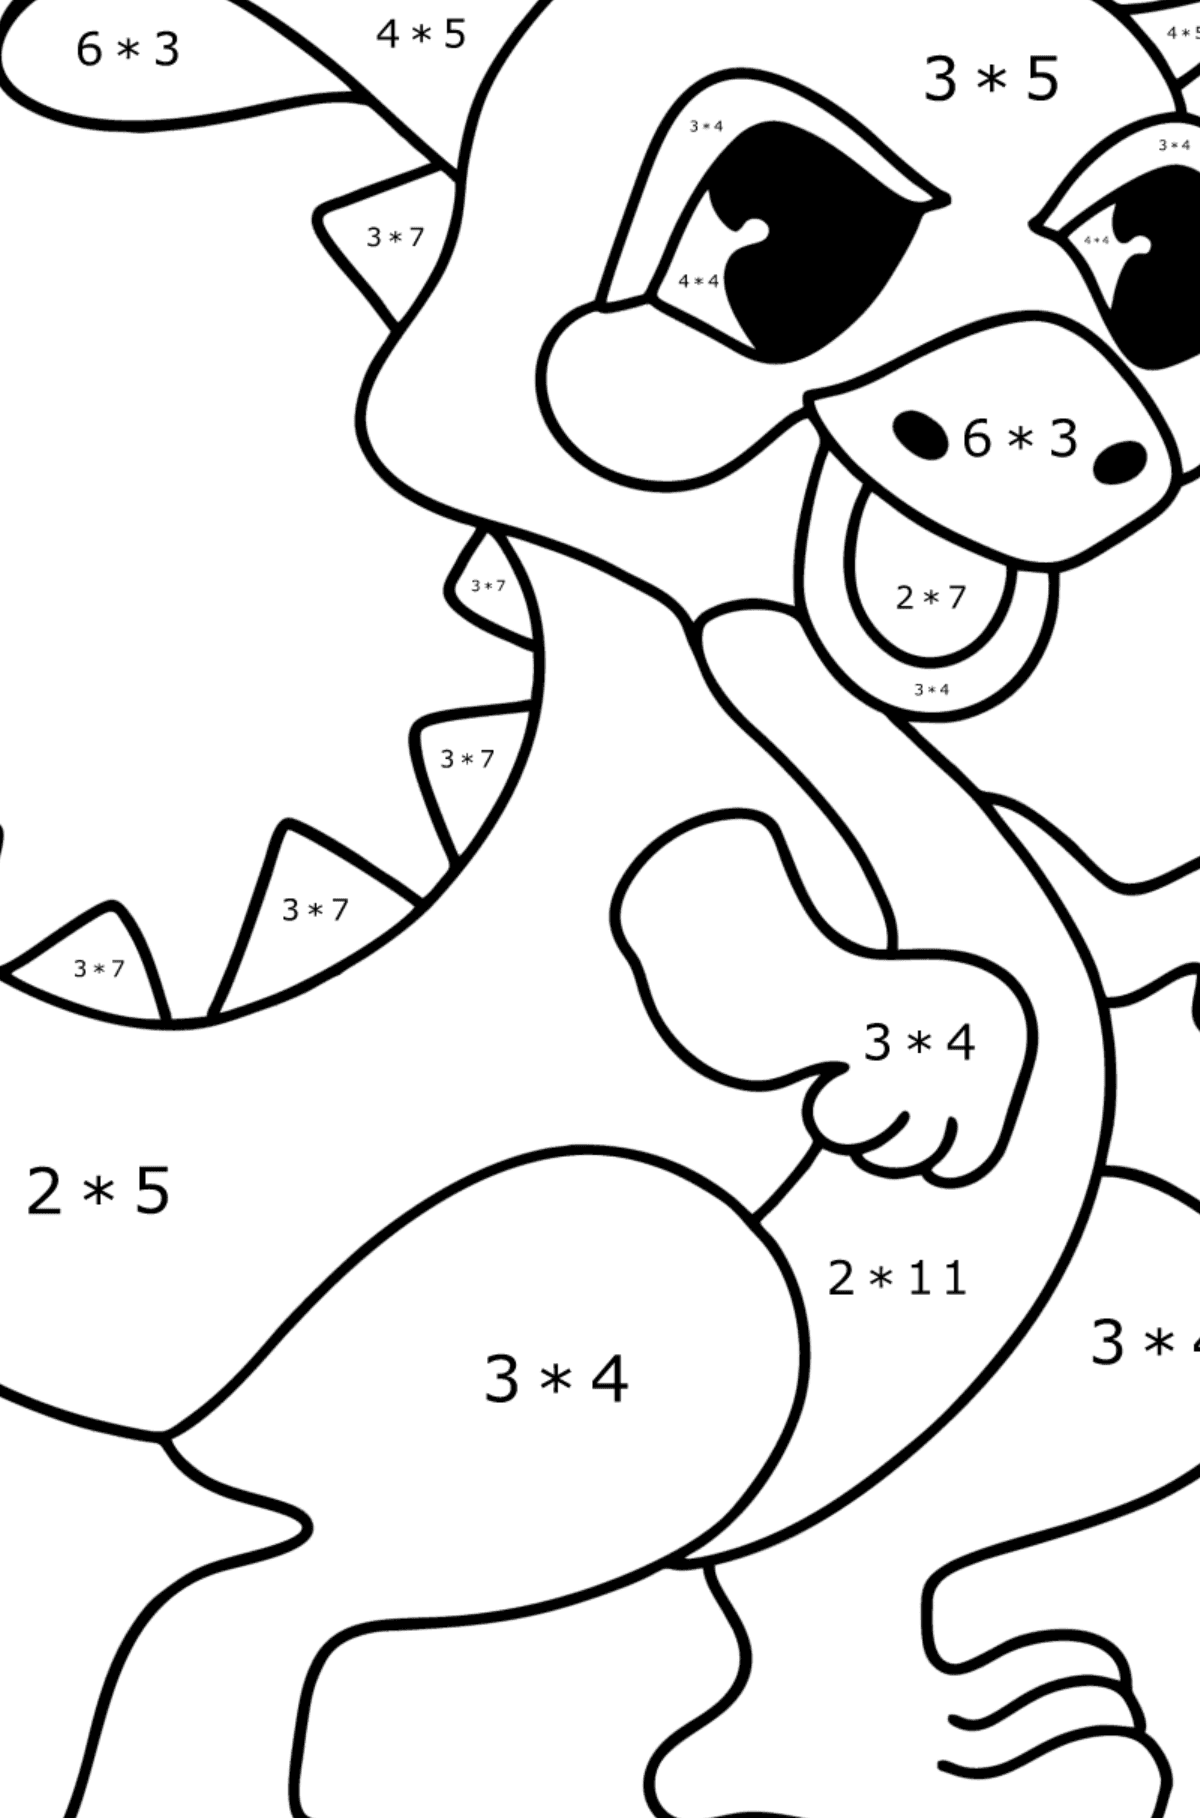 Cartoon dragon coloring page - Math Coloring - Multiplication for Kids